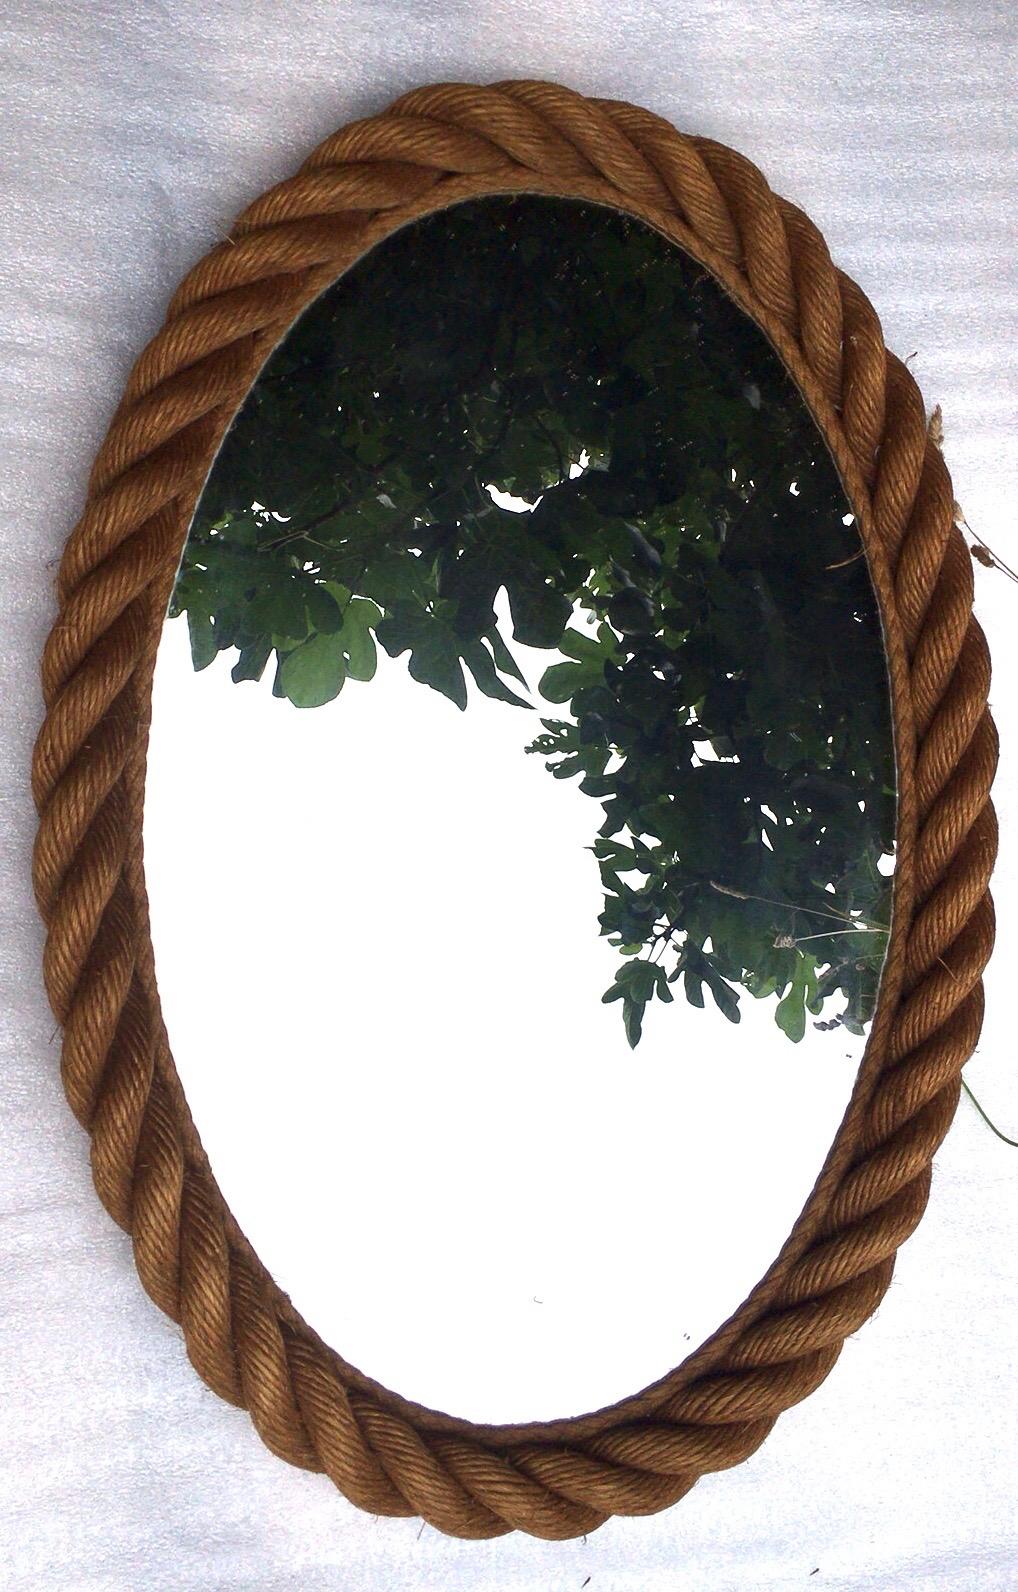 Large oval rope mirror Audoux Minet, circa 1960 from South of France.